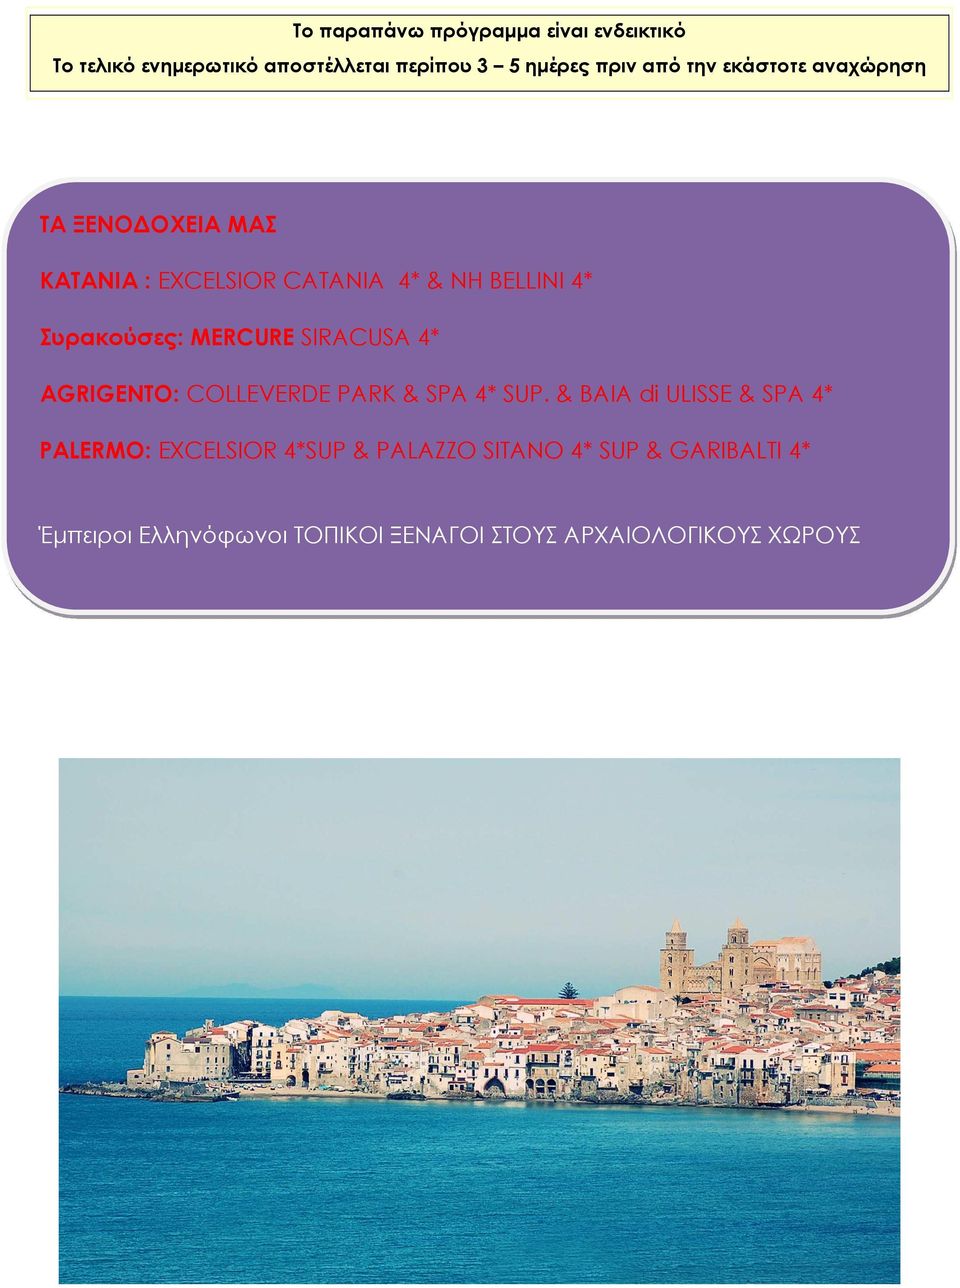 MERCURE SIRACUSA 4* AGRIGENTO: COLLEVERDE PARK & SPA 4* SUP.